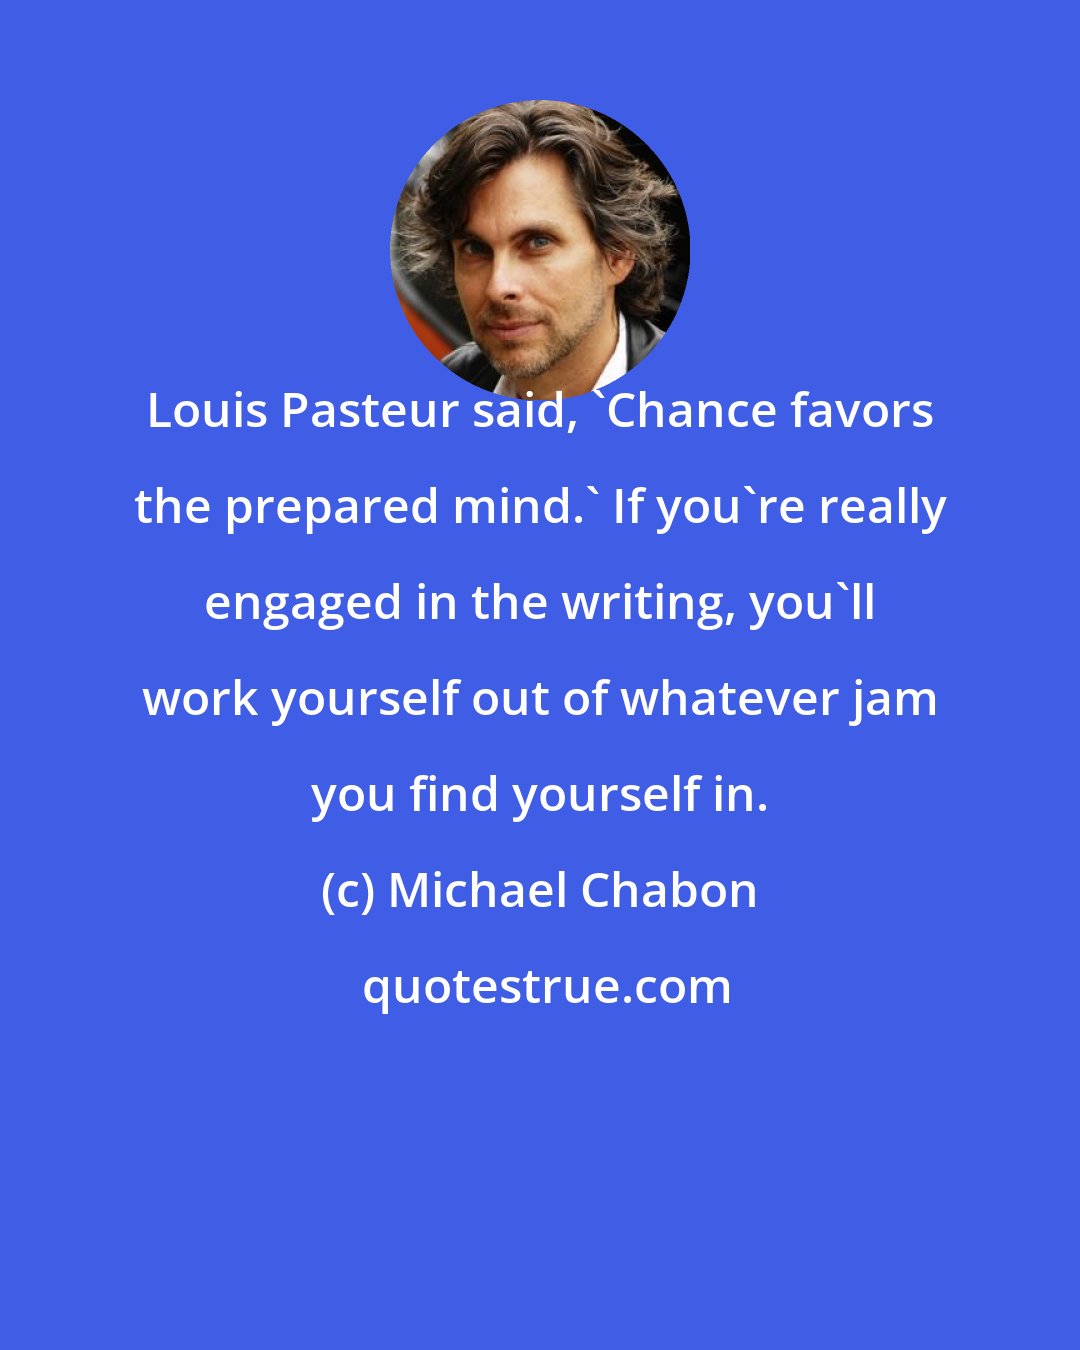 Michael Chabon: Louis Pasteur said, 'Chance favors the prepared mind.' If you're really engaged in the writing, you'll work yourself out of whatever jam you find yourself in.